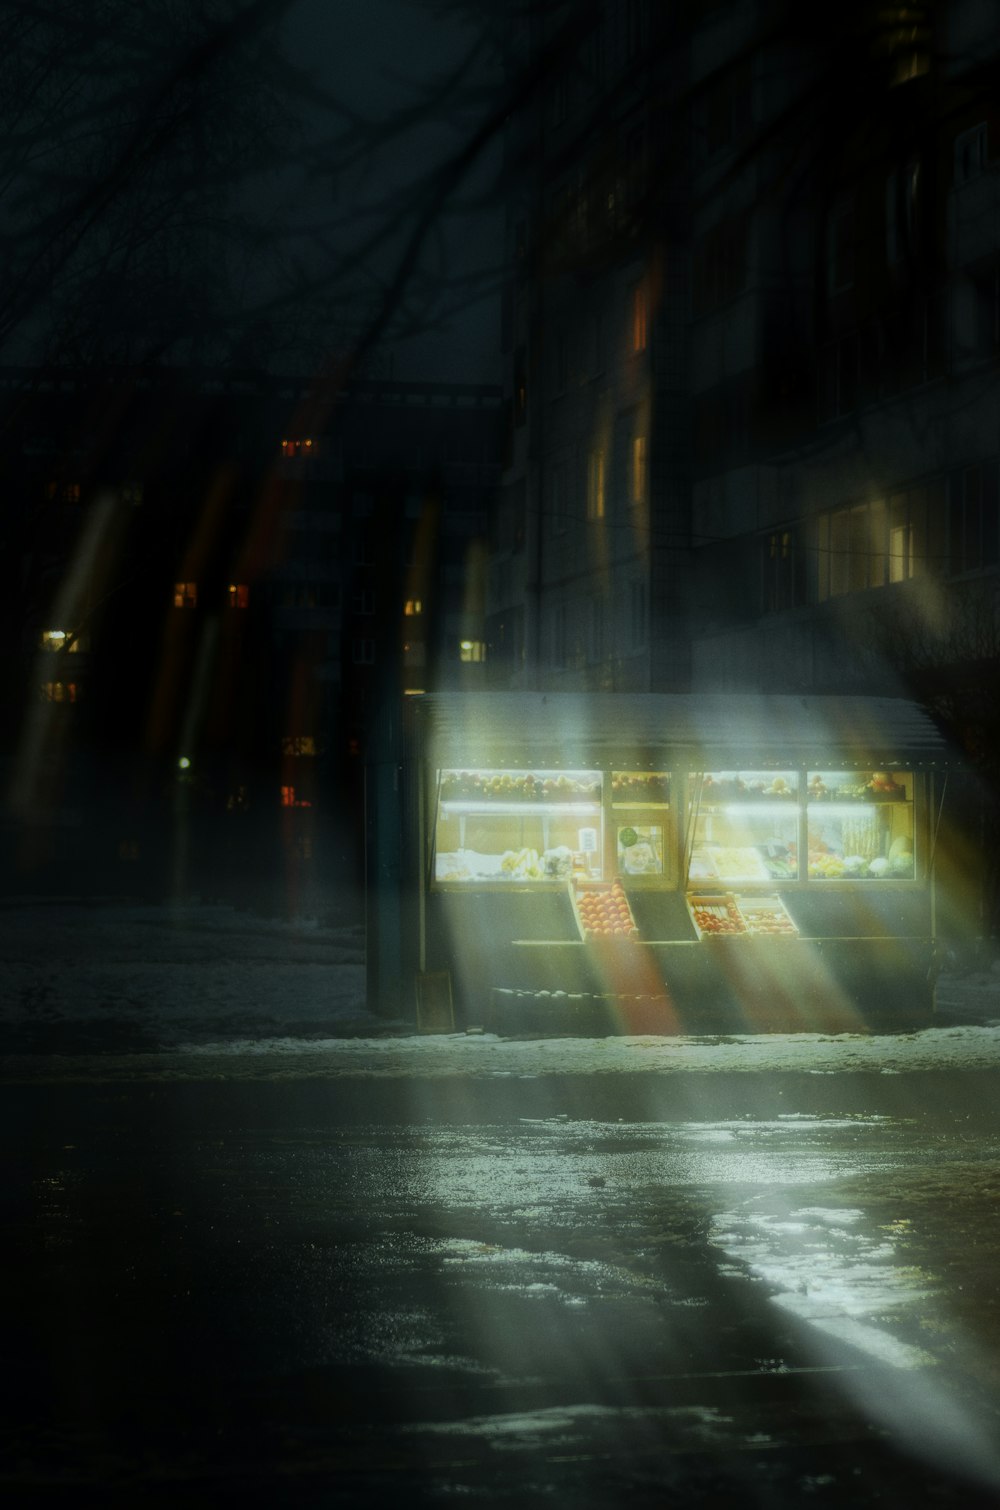 a street scene with focus on a store front